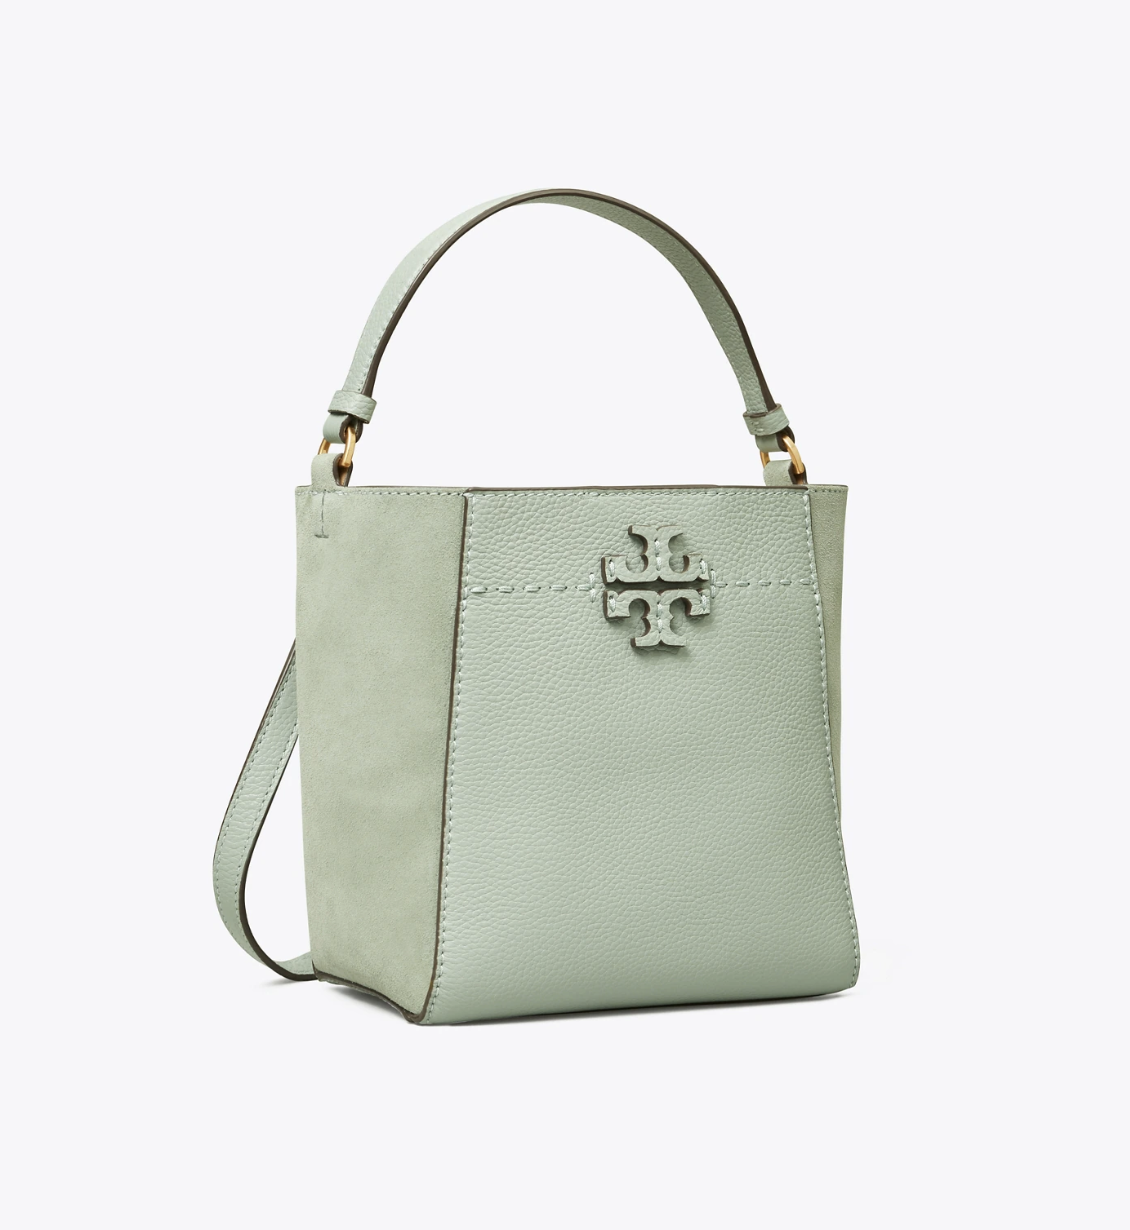 Manay's Bags - TORY BURCH see pic/s for more details